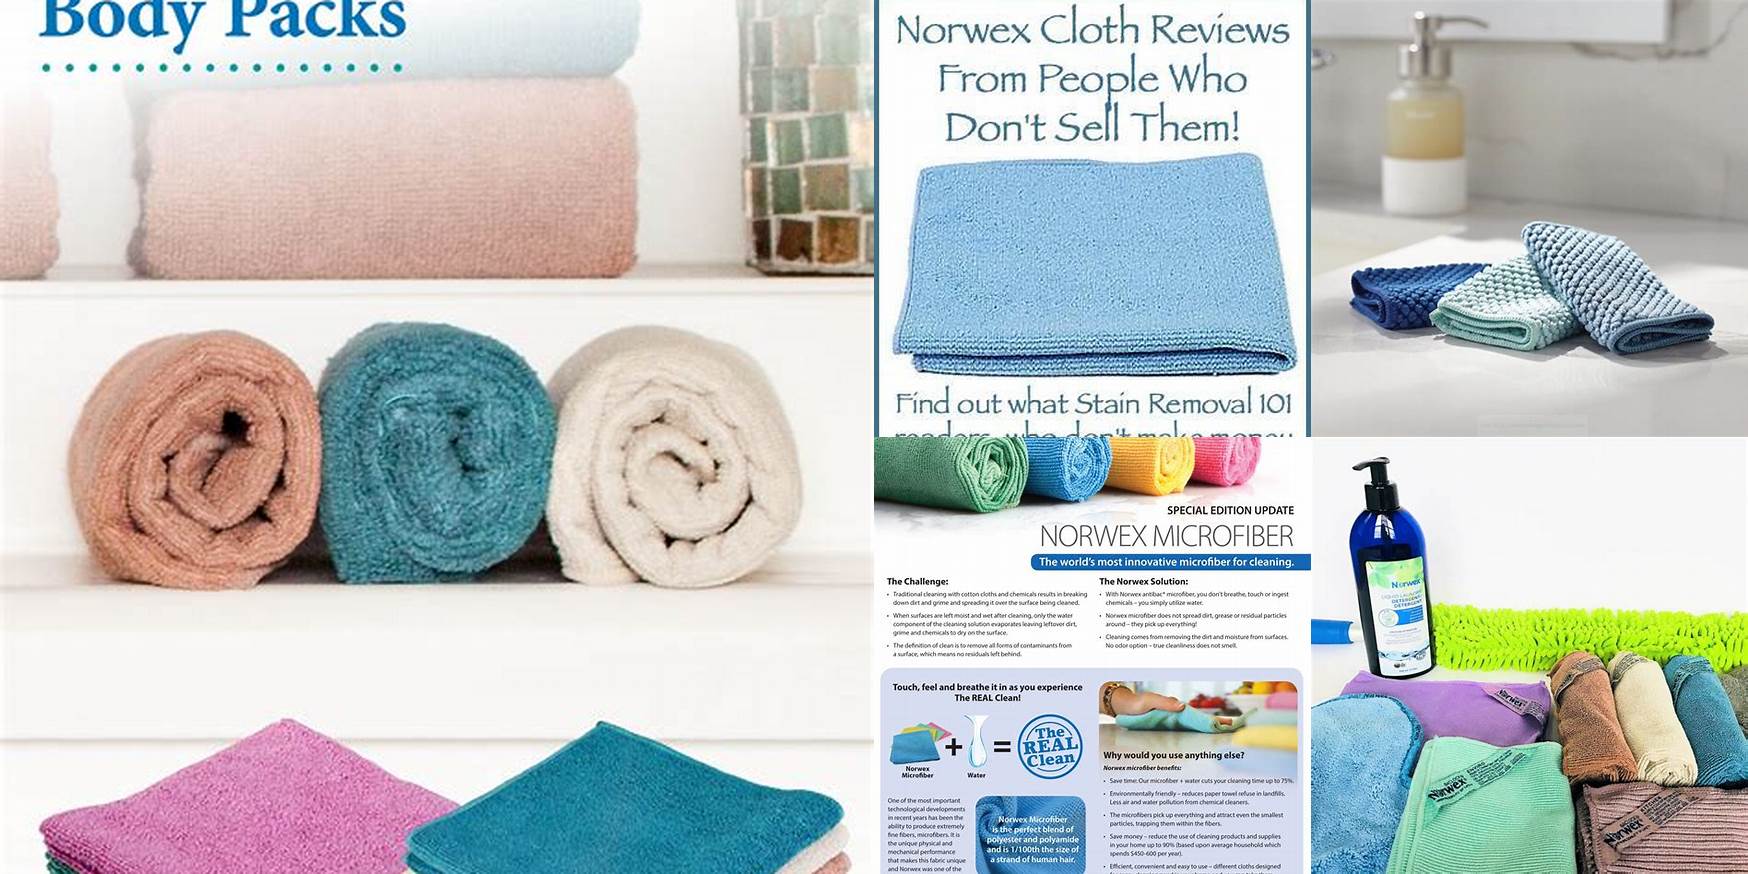 Do Norwex Cloths Really Work